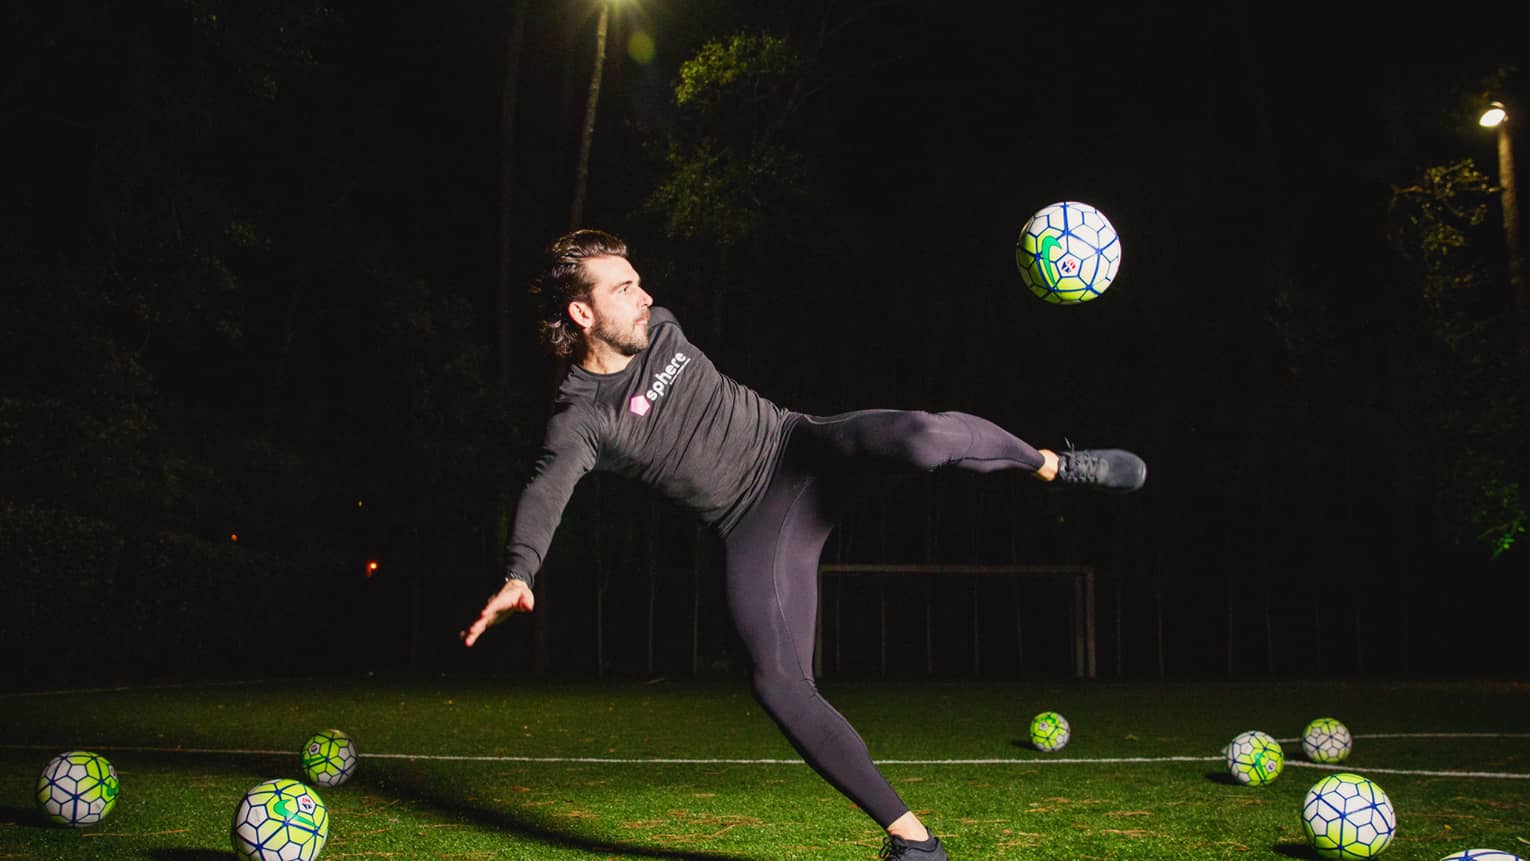 POWA by sphere session, Michael Chabala kicks soccer ball in mid-air on field with multiple balls at night